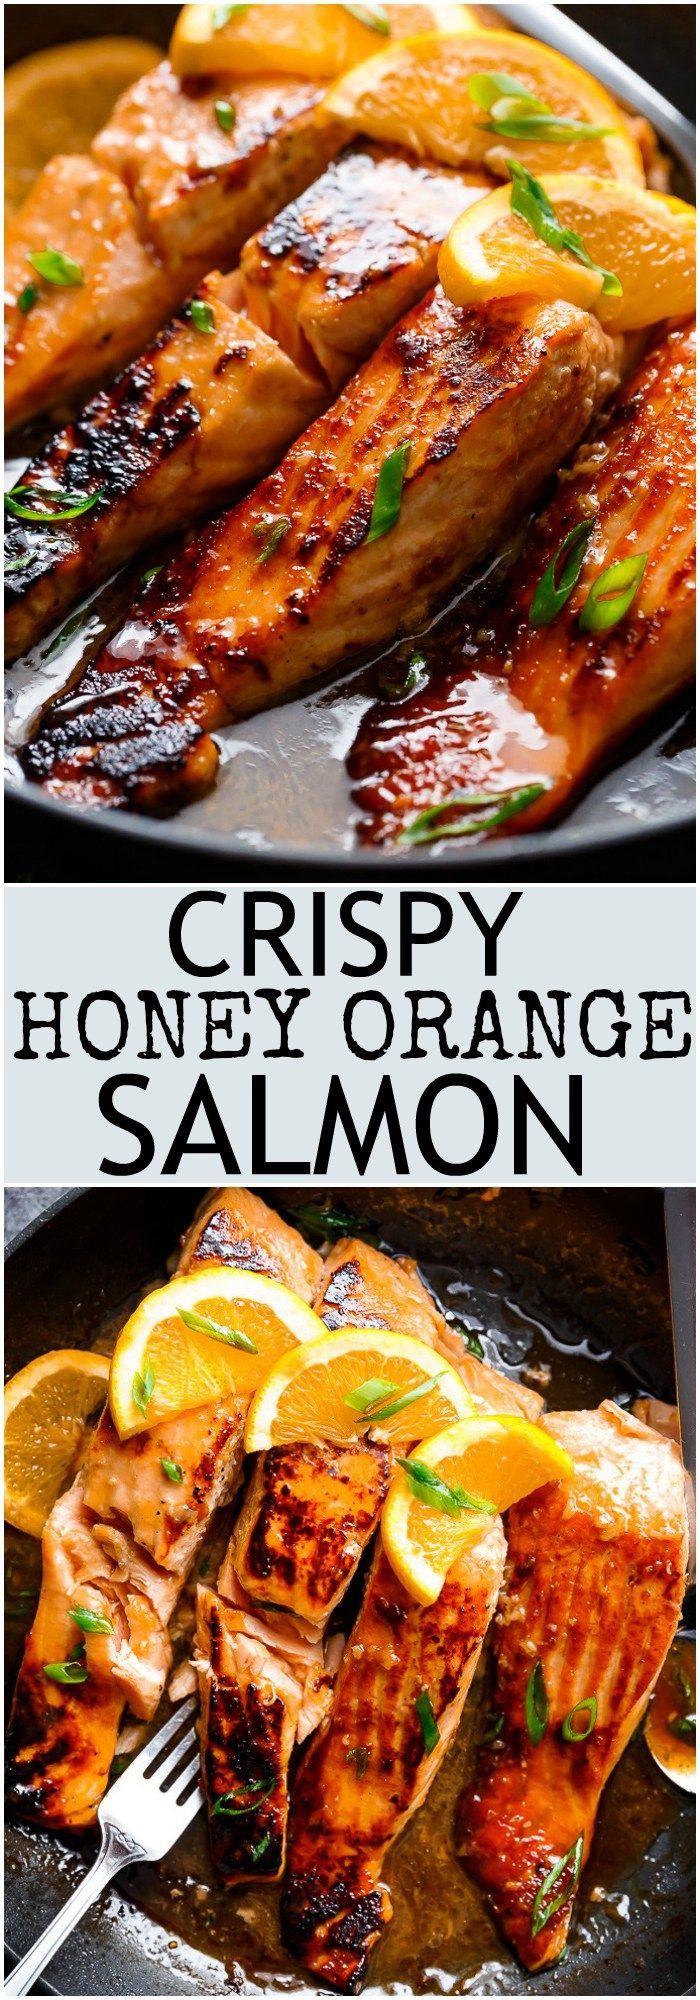 Crispy Honey Orange Glazed Salmon fillets are pan-fried in the most beautiful honey-orange-garlic sauce, with a splash of soy for